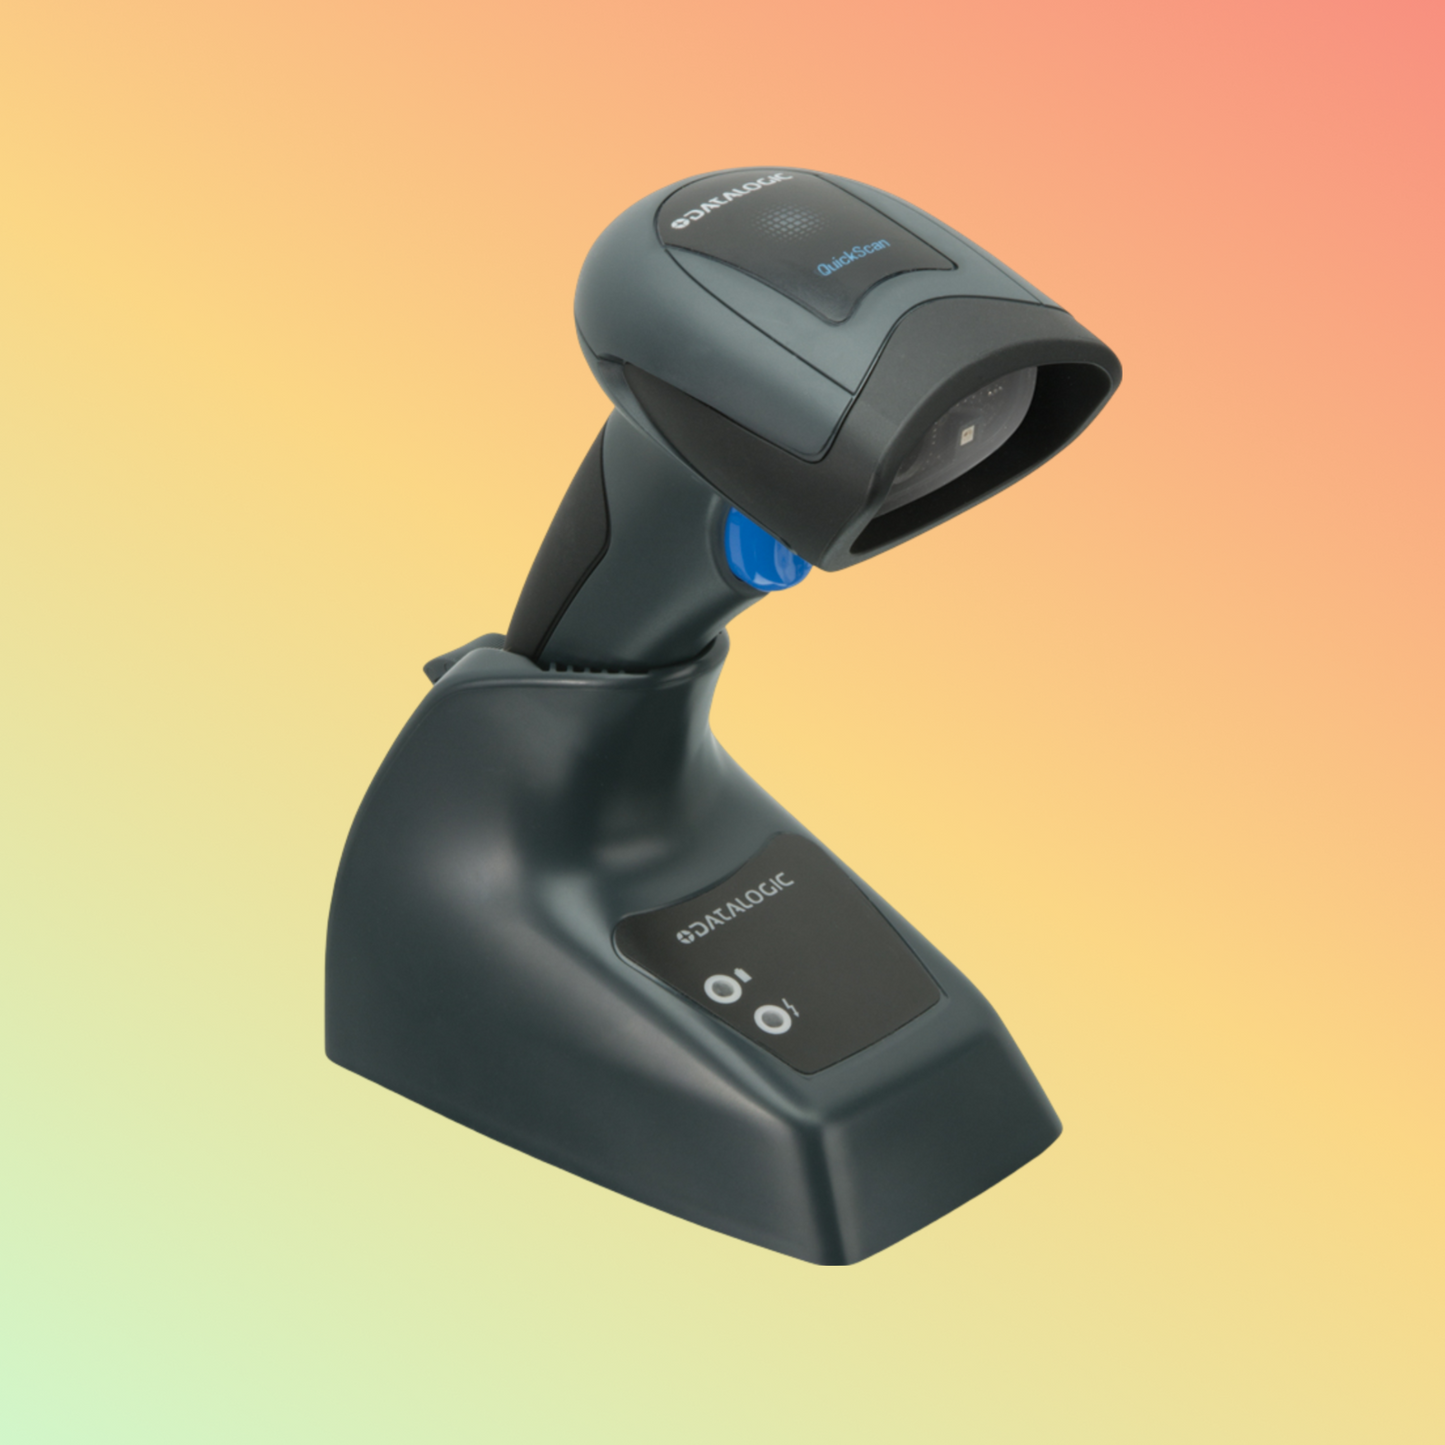 alt="DCI Scanning QM2400 Mobile 2D Barcode Scanner in retail use"